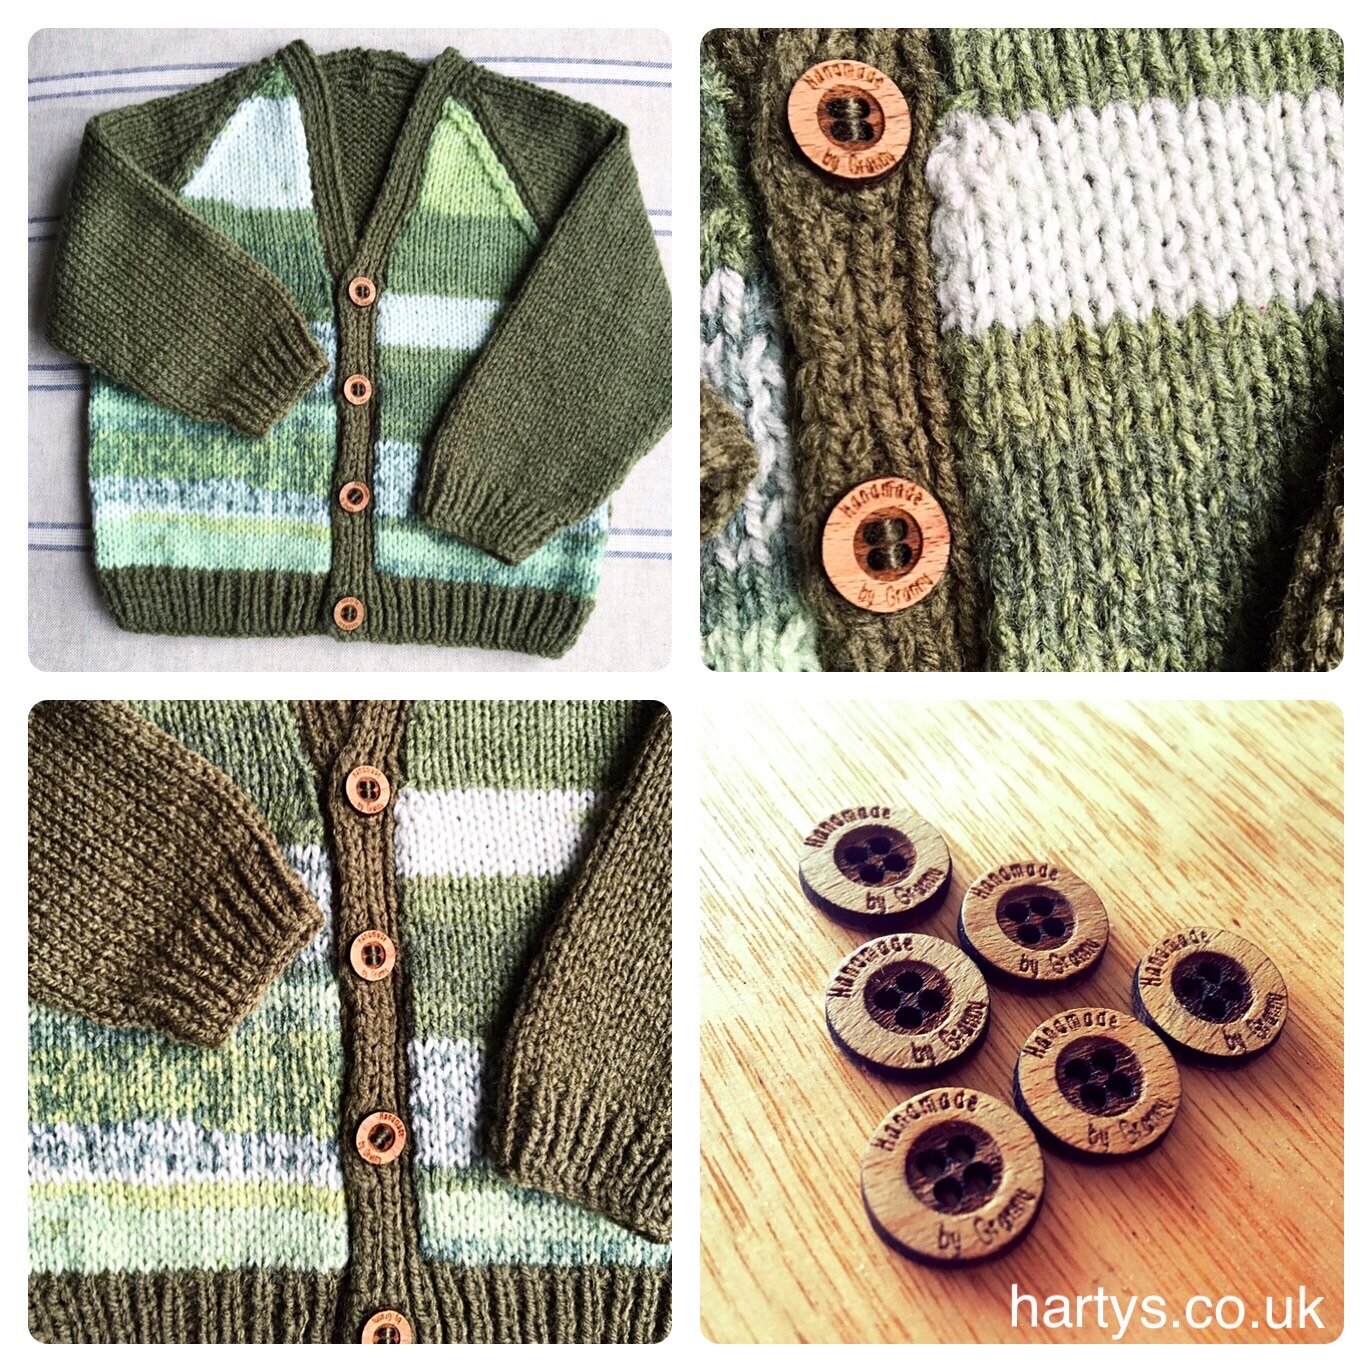 These “Handmade by Granny” walnut buttons look stunning on this beautiful cardigan and adds to the finishing touches perfectly.